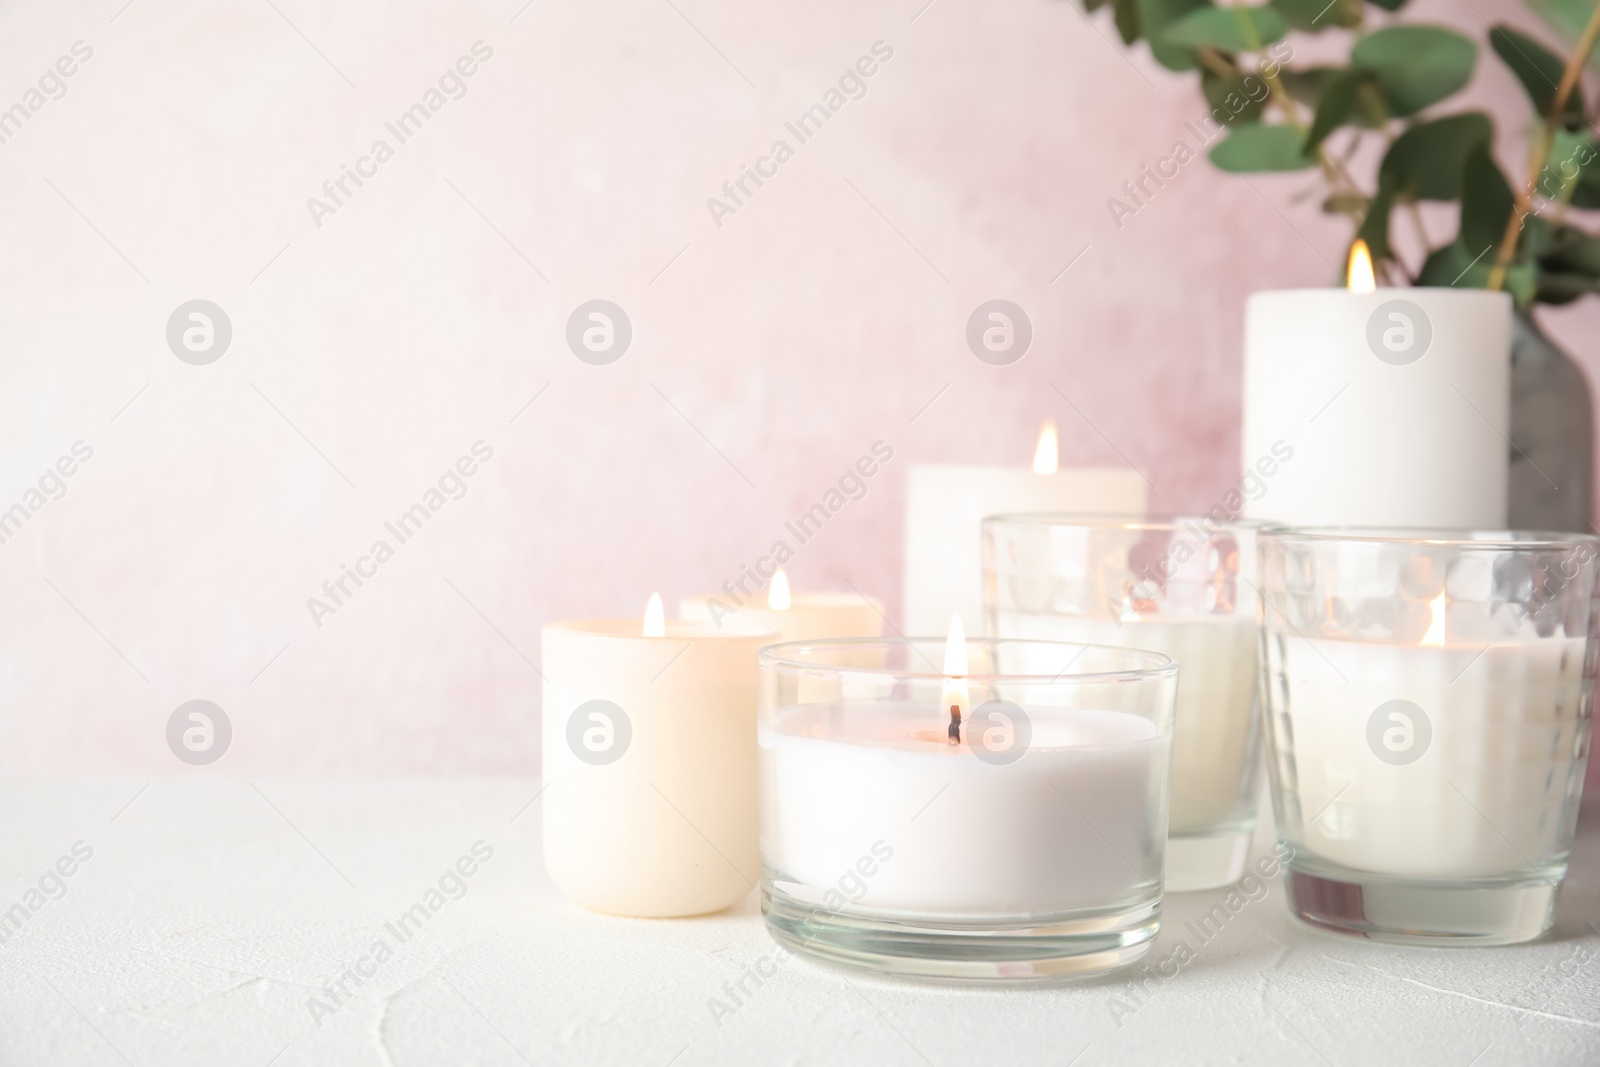 Photo of Burning aromatic candles in holders on table. Space for text